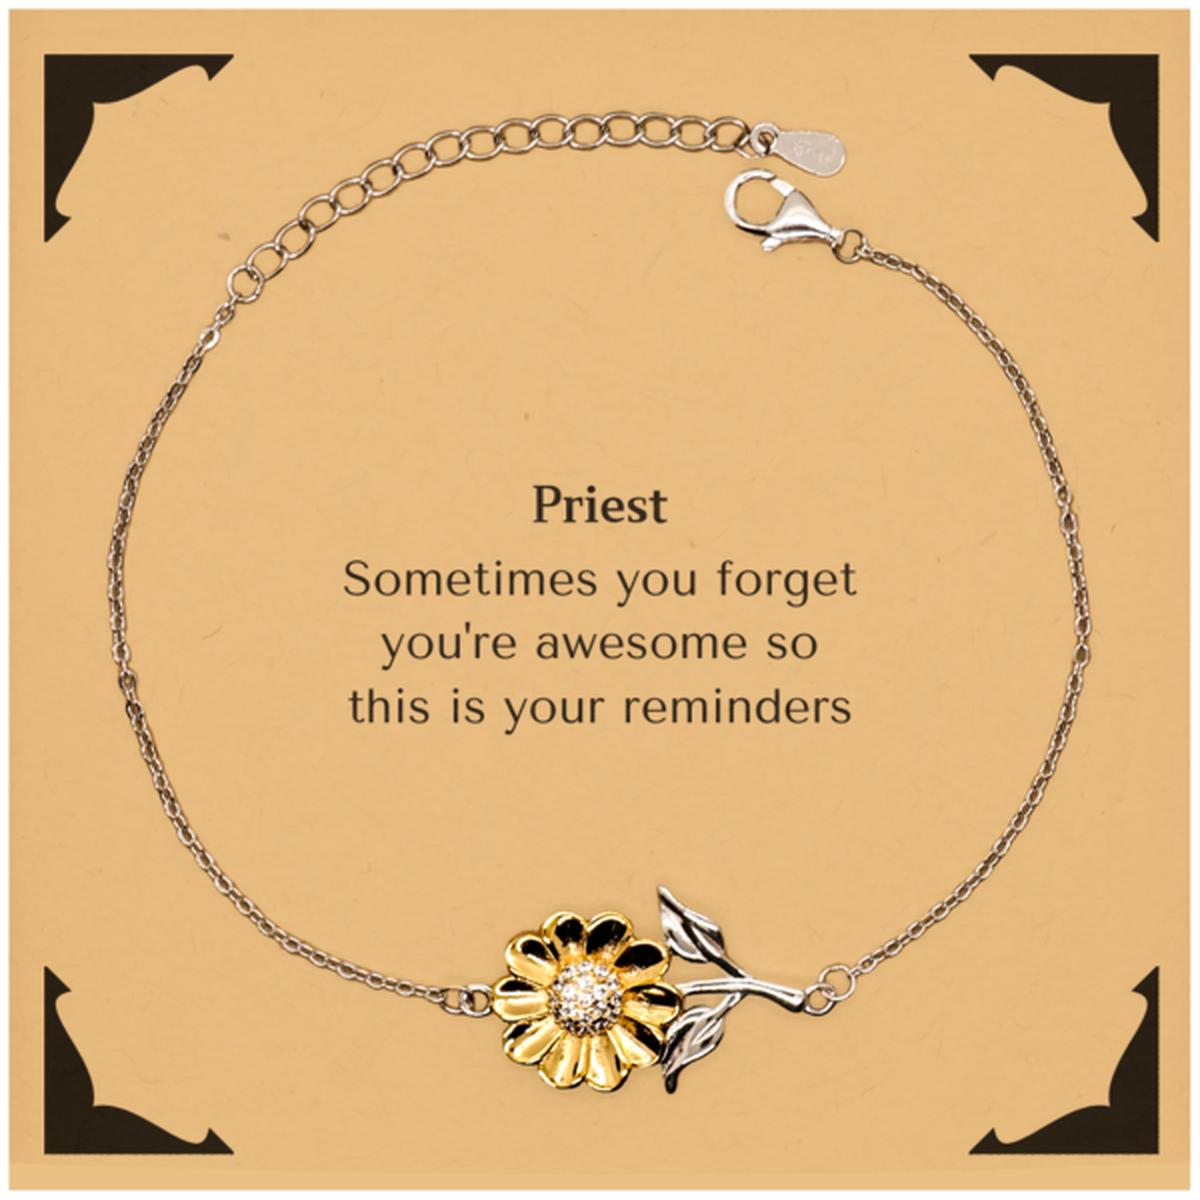 Sentimental Priest Sunflower Bracelet, Priest Sometimes you forget you're awesome so this is your reminders, Graduation Christmas Birthday Gifts for Priest, Men, Women, Coworkers